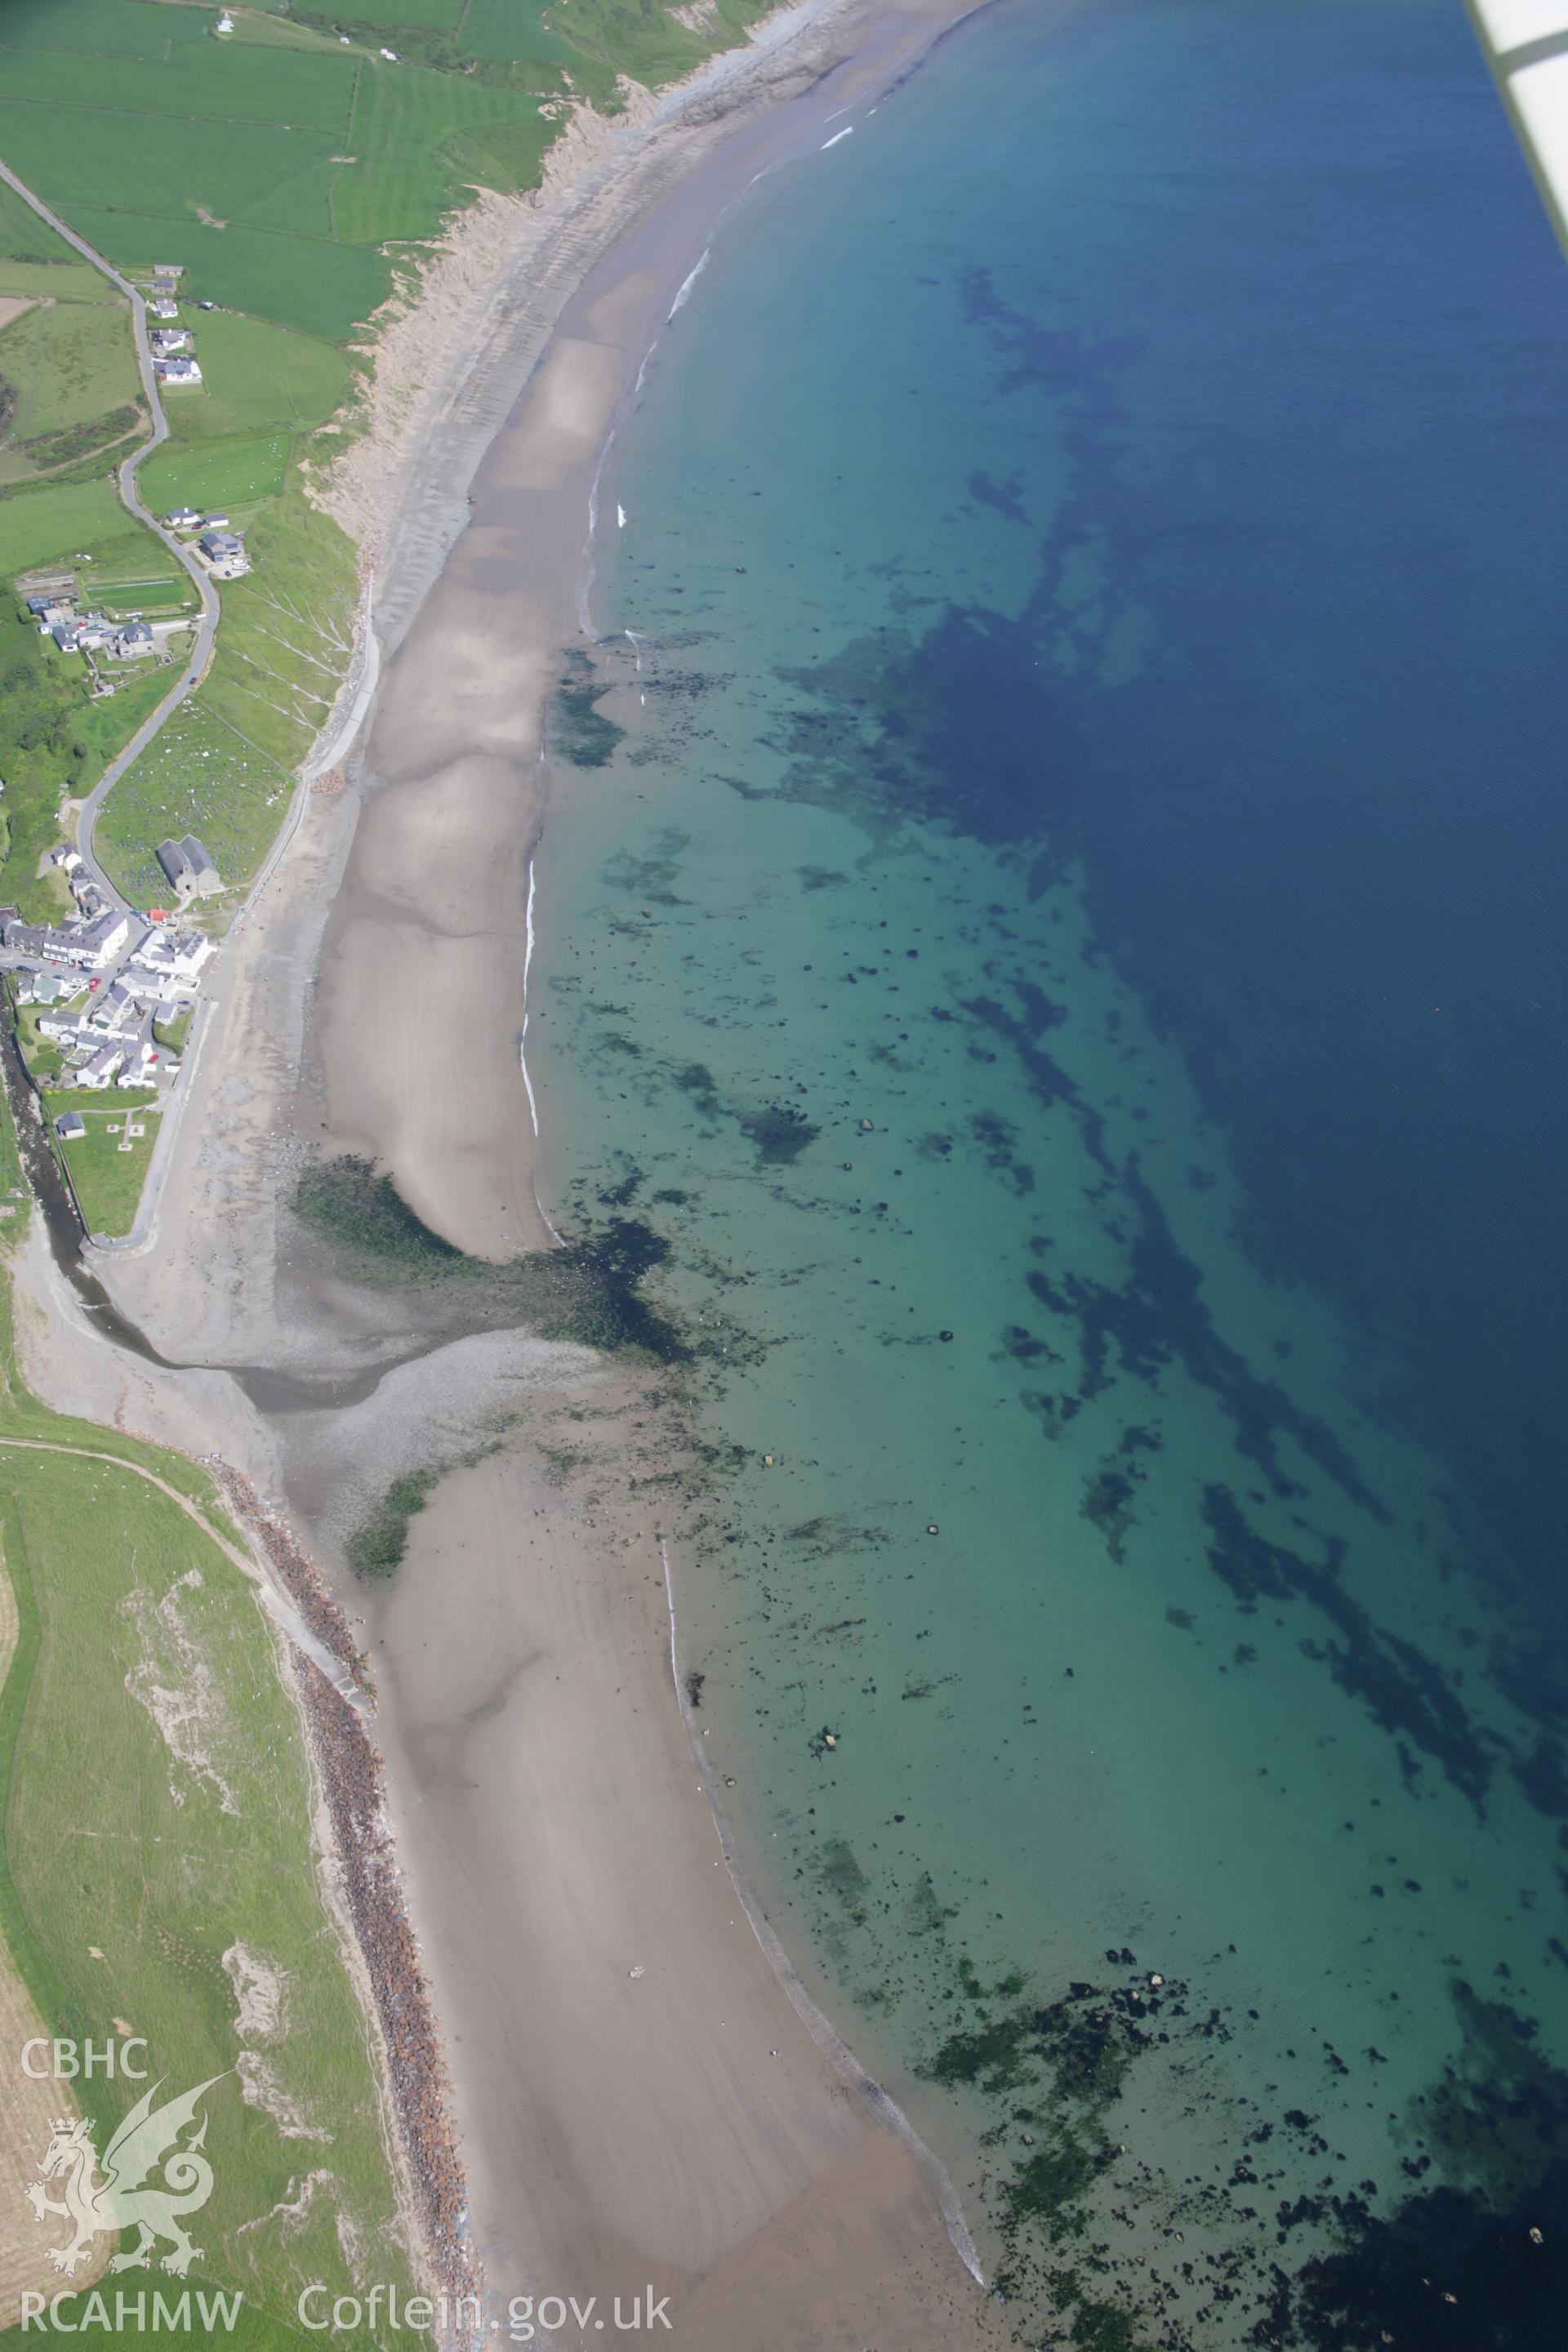 RCAHMW colour oblique aerial photograph of Aberdaron with the seafront from the west. Taken on 14 June 2006 by Toby Driver.